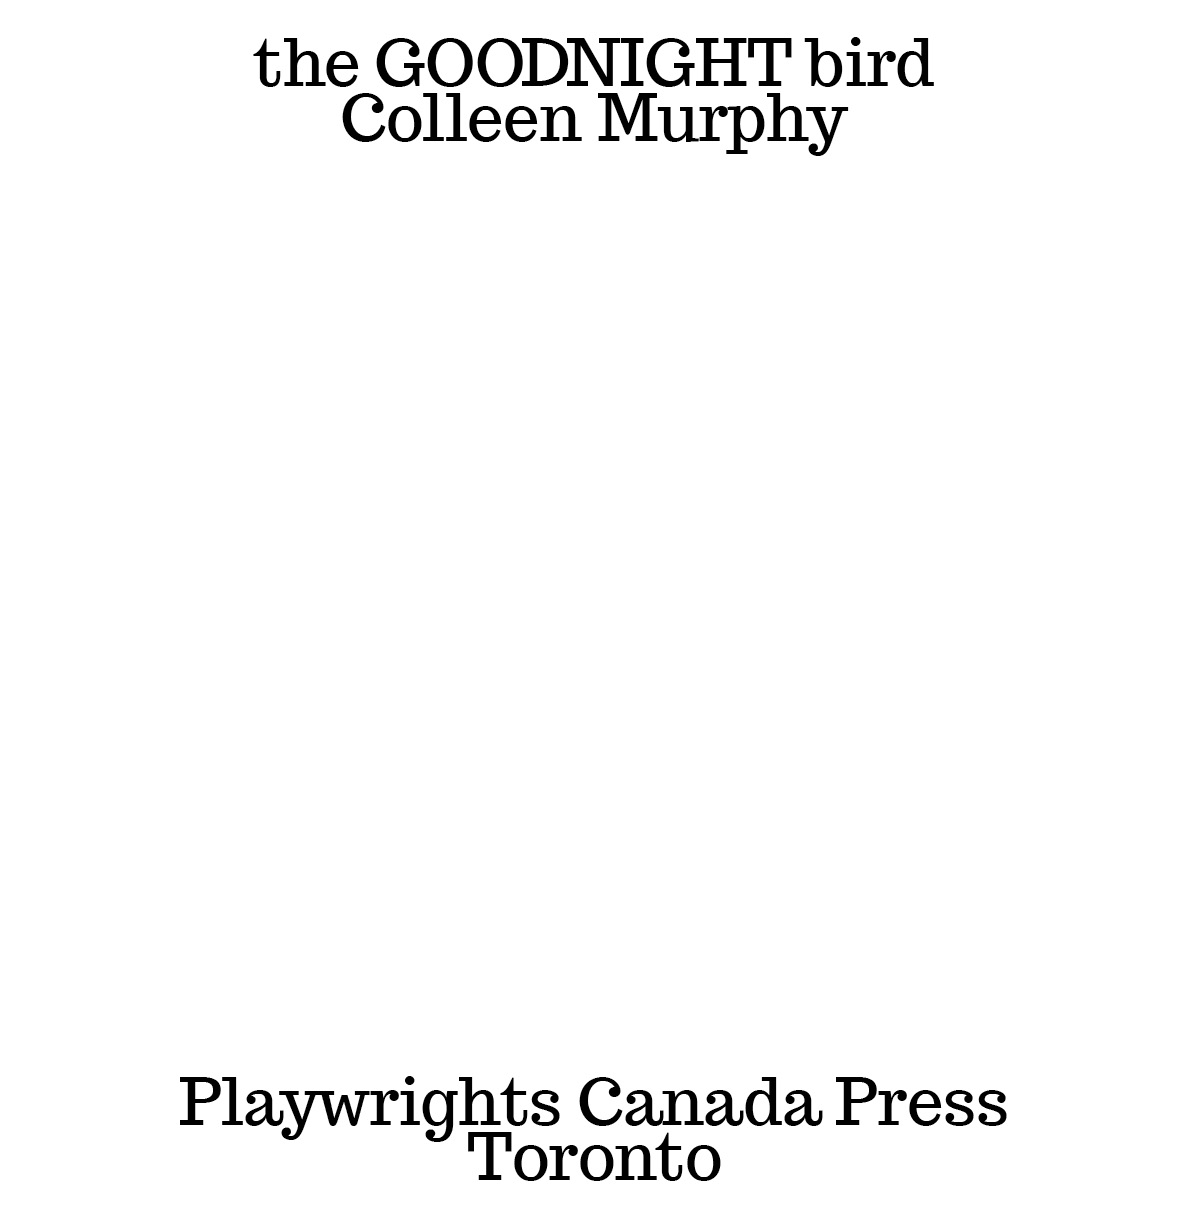 The Goodnight Bird Copyright 2013 by Colleen Murphy Playwrights Canada Press - photo 2